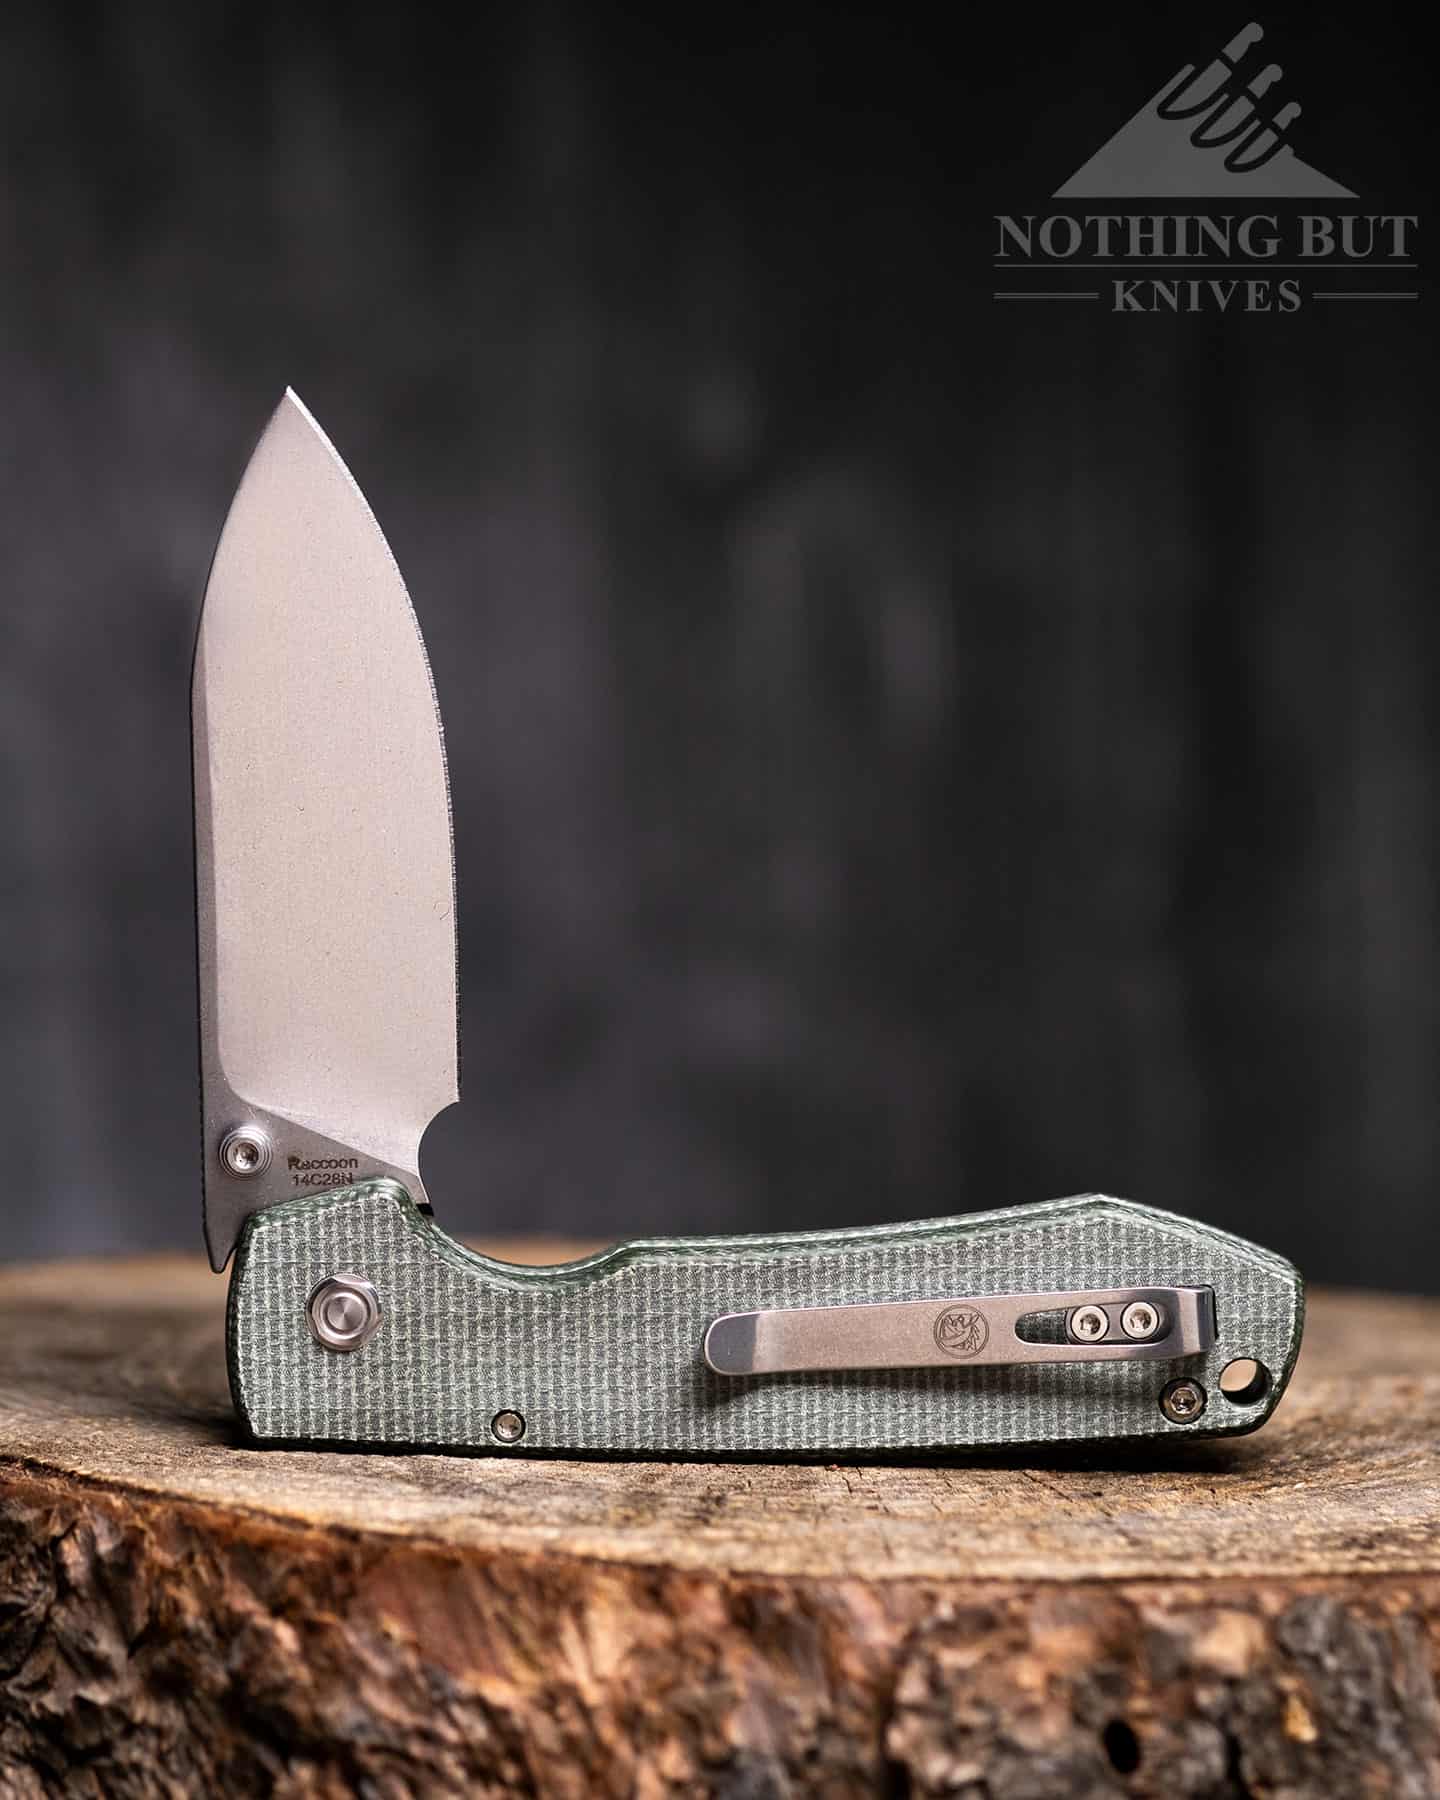 The Vosteed Racoon features a button lock, micarta handle scales and a 14C28N steel blade.